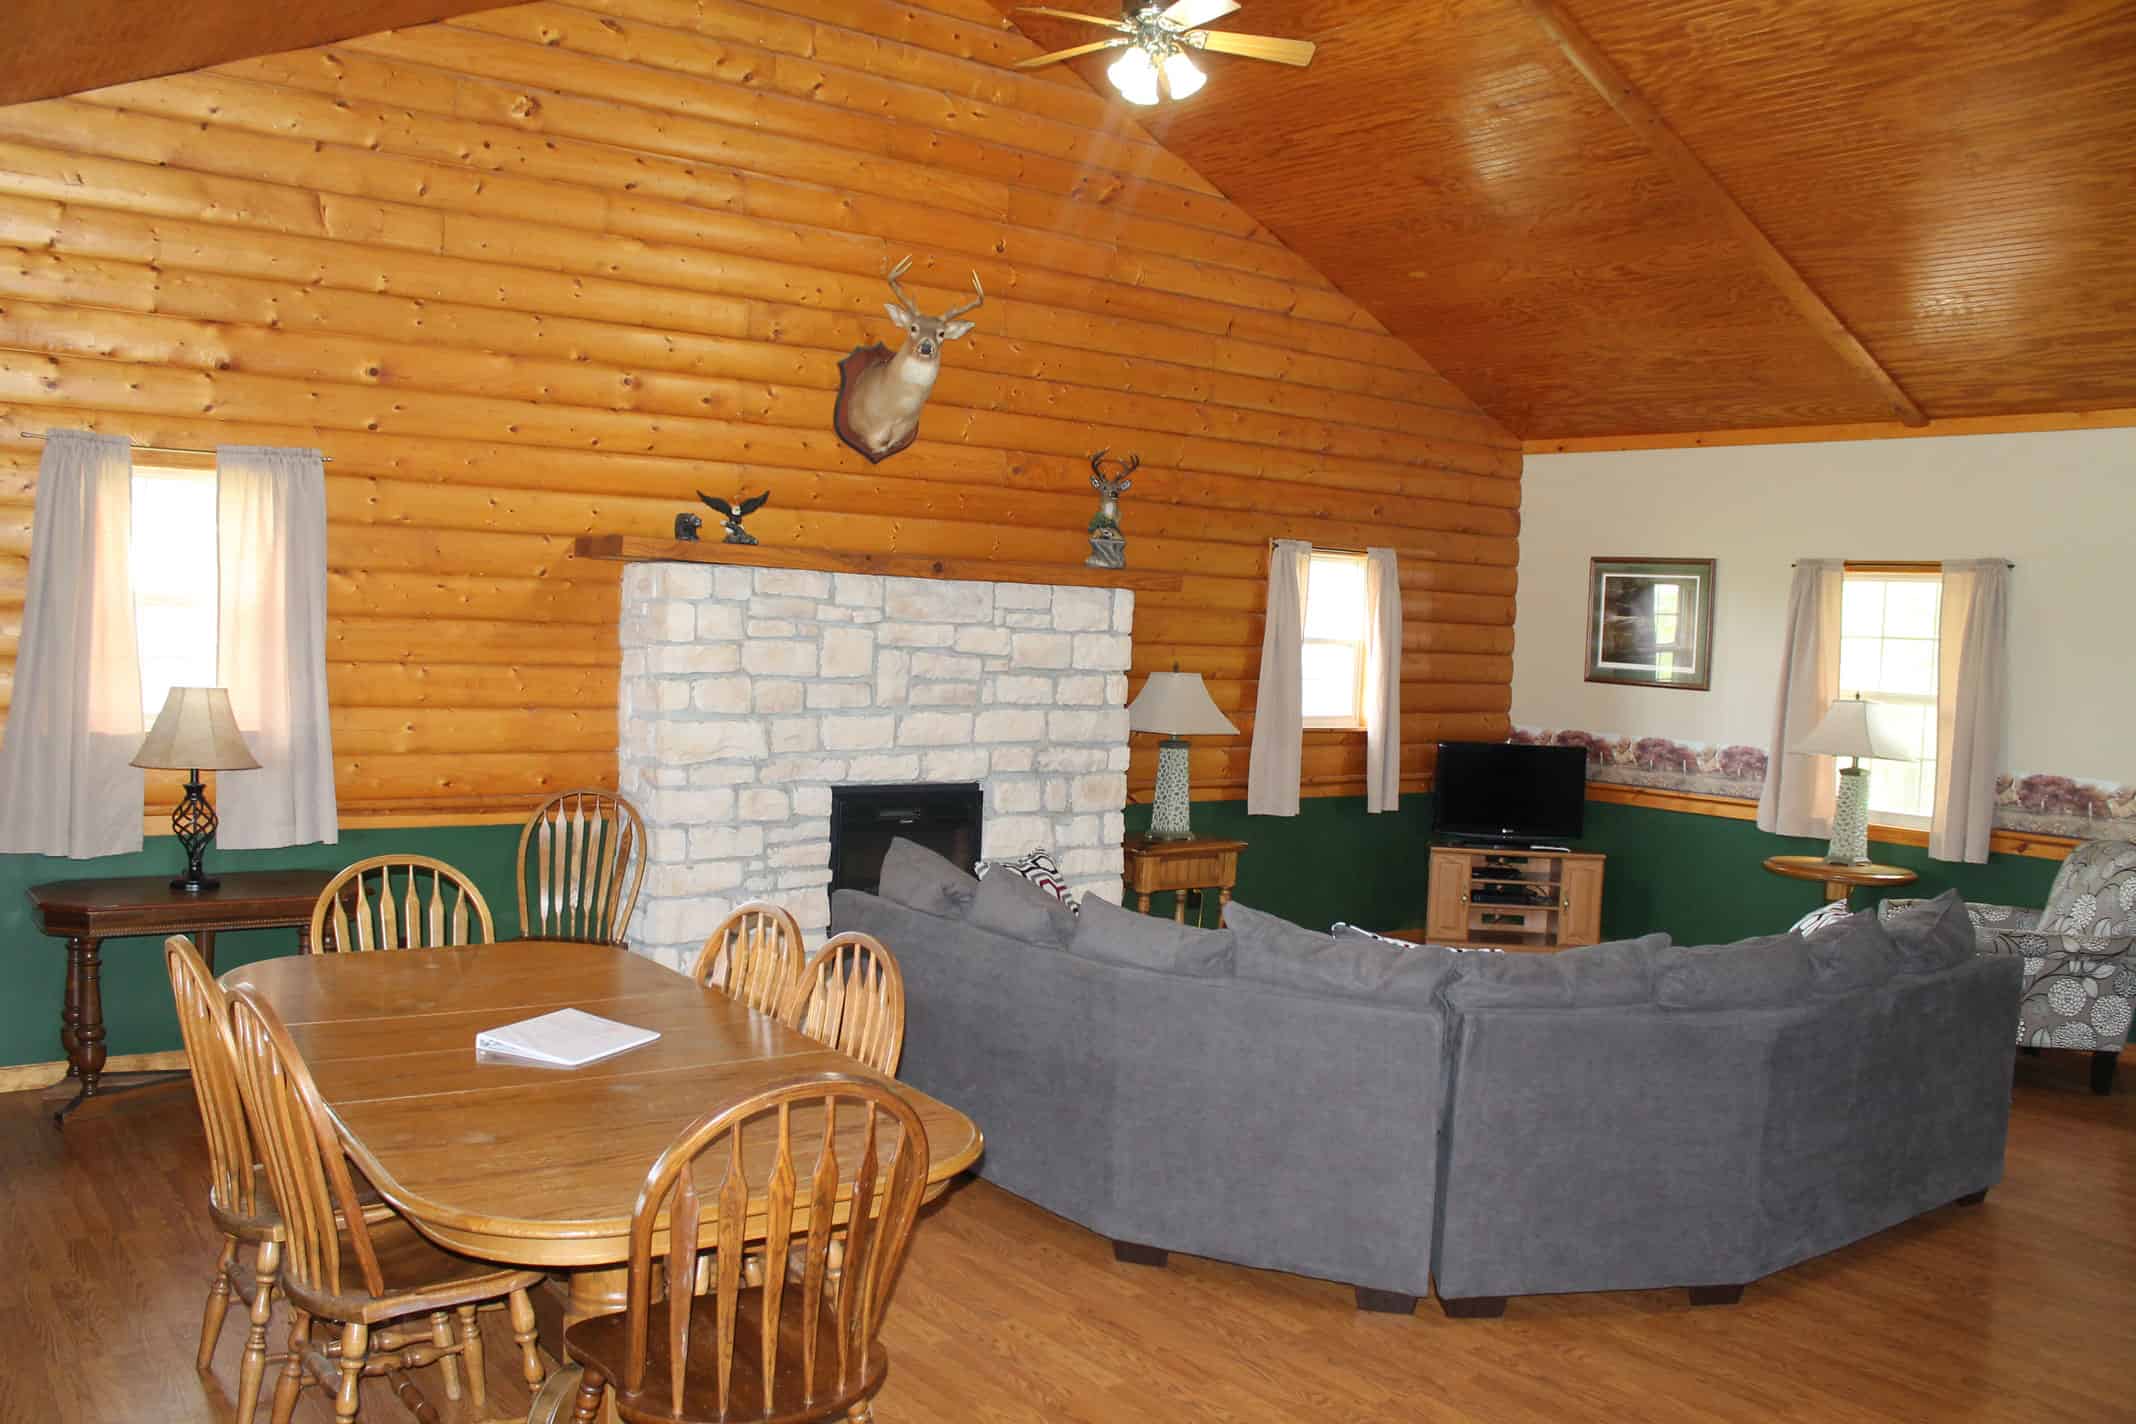 living area of a three bedroom cabin located near lake shelbyville in illinois